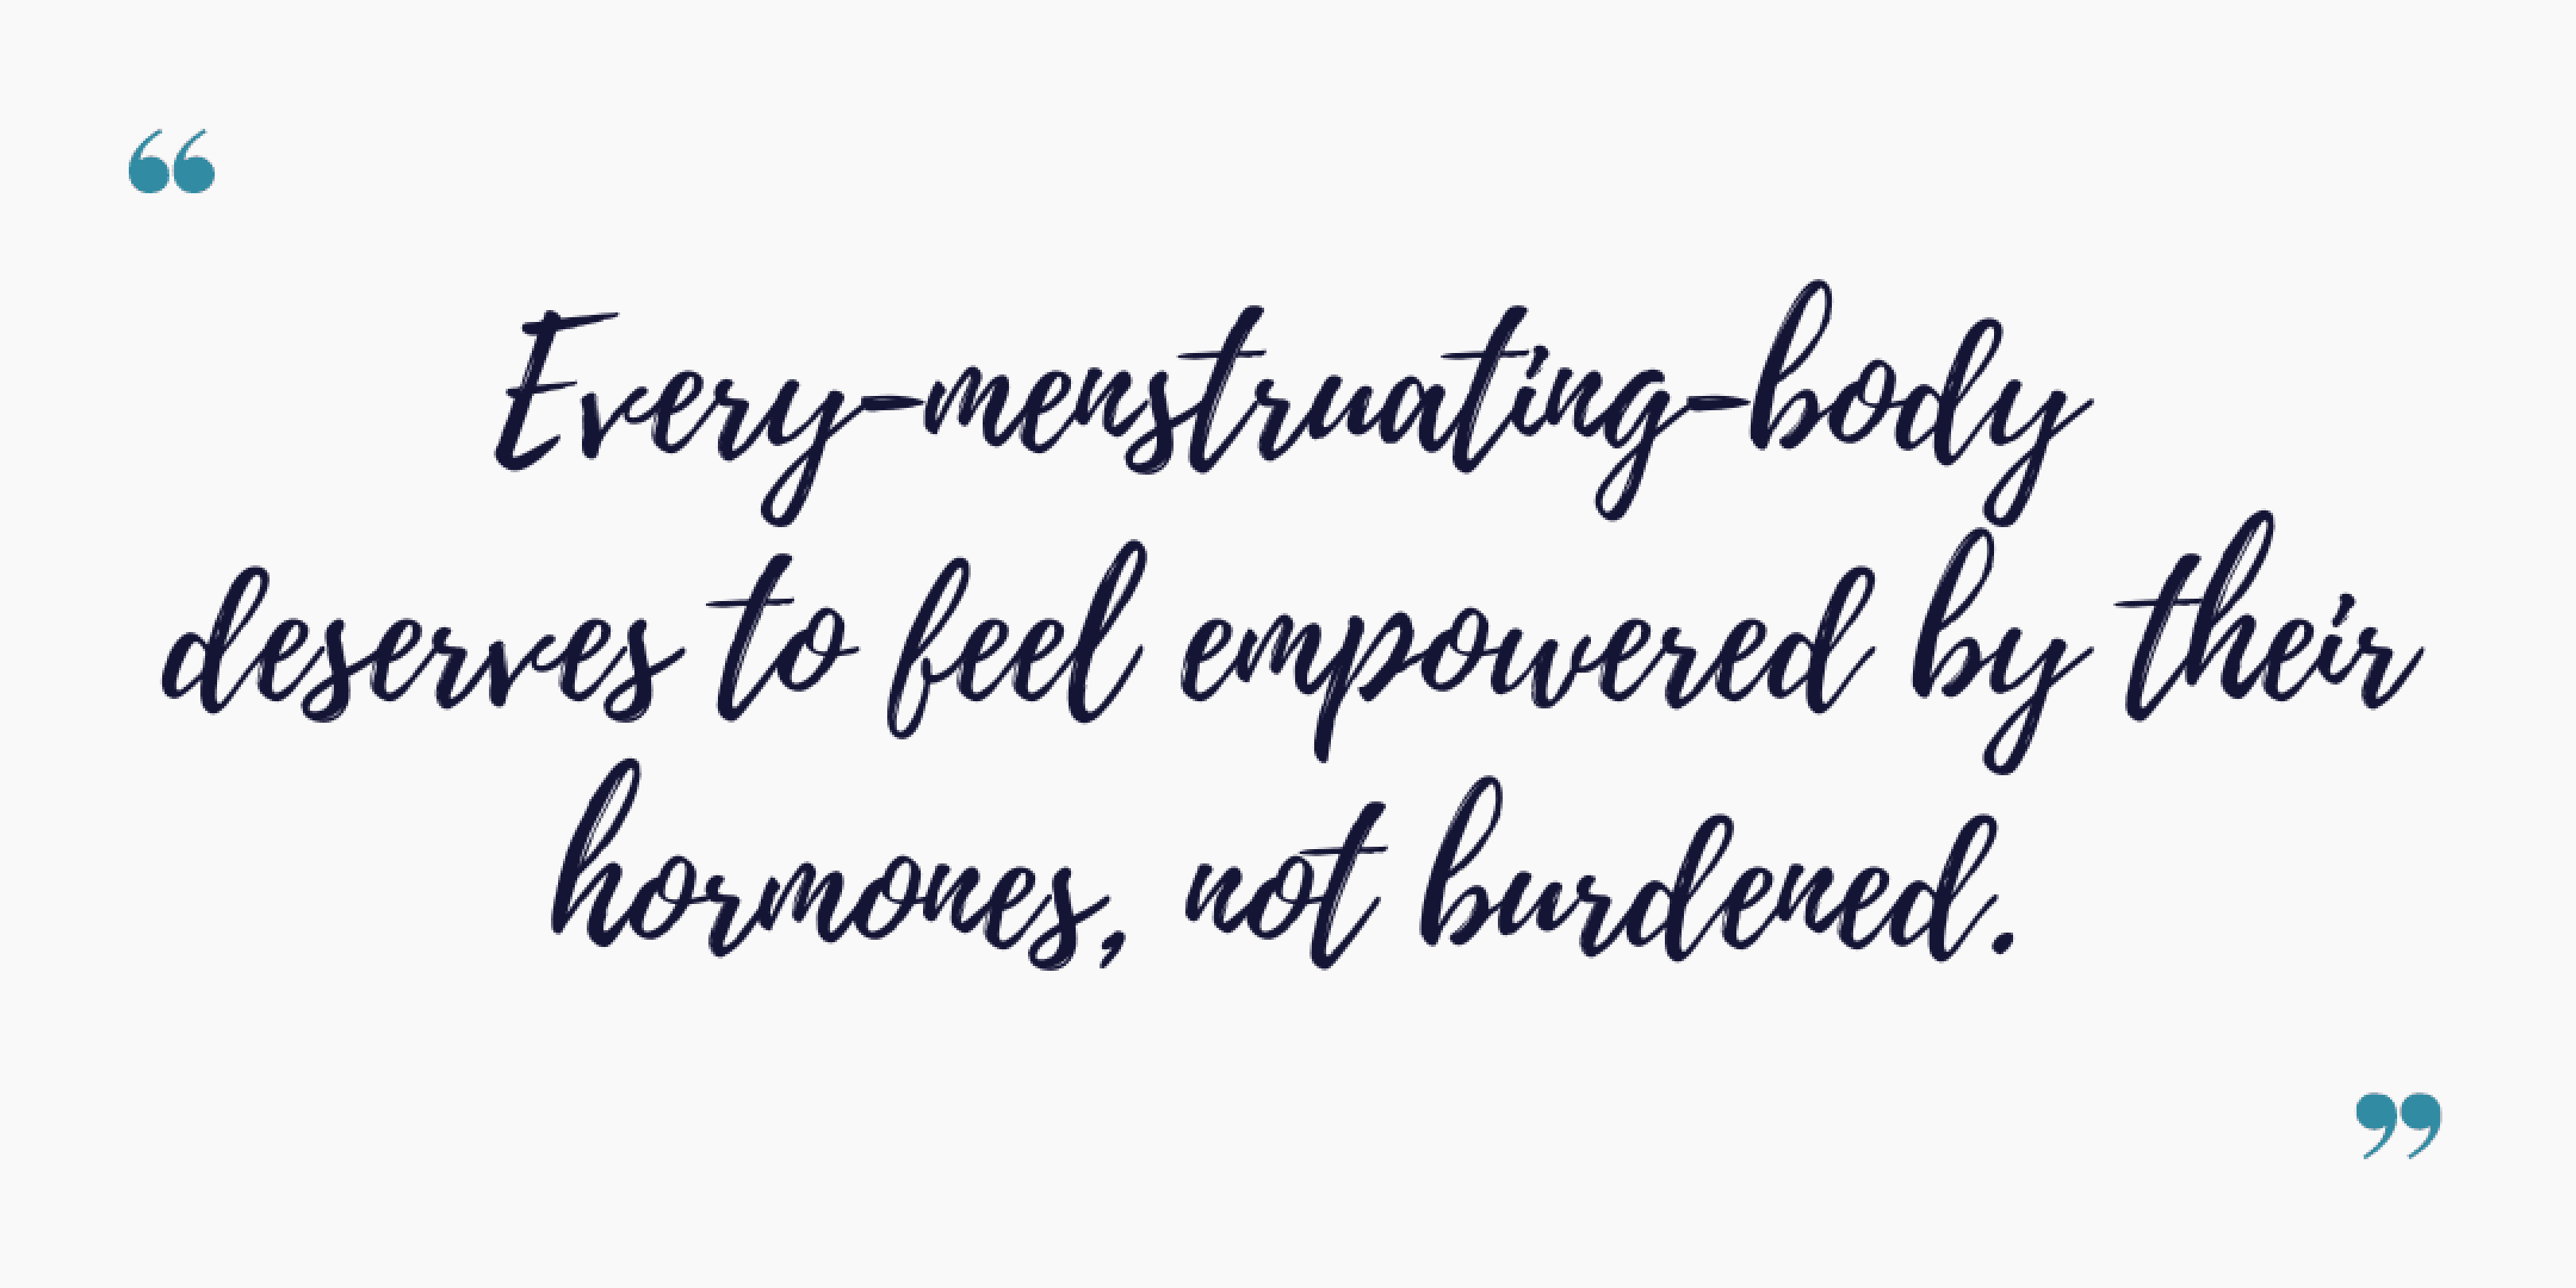 Every menstruator deserves to feel empowered by their hormones, not burdened.